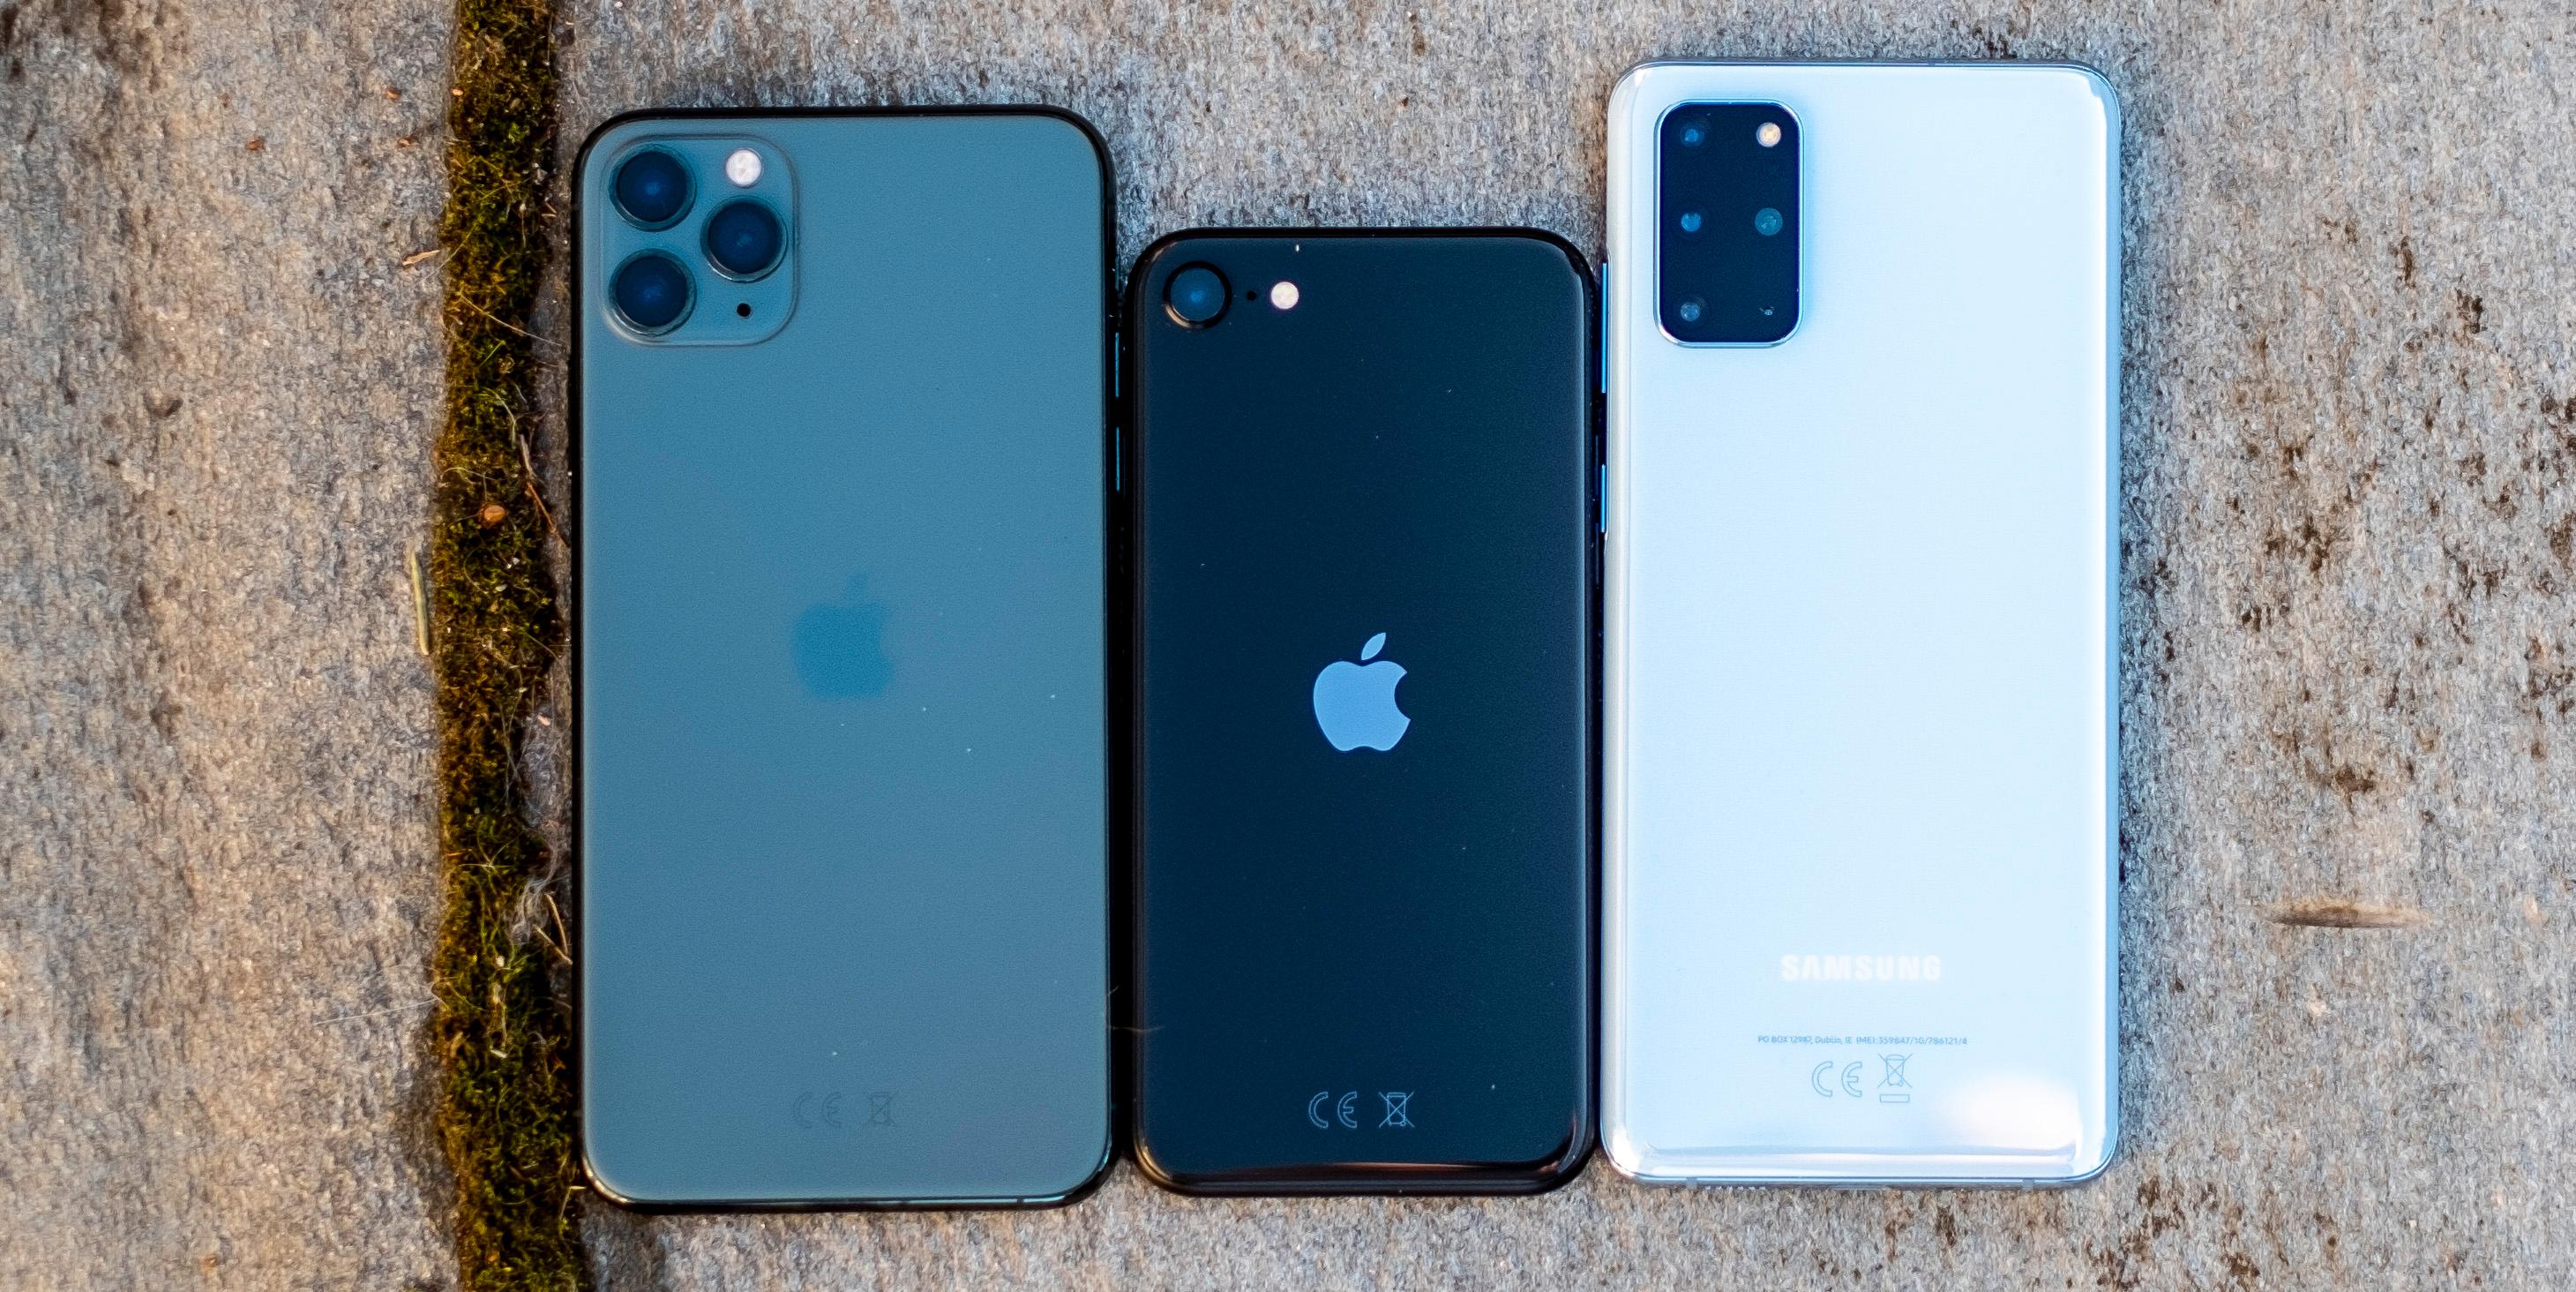 Fra venstre: iPhone 11 Pro Max, iPhone SE (2020), Galaxy S20 Plus.